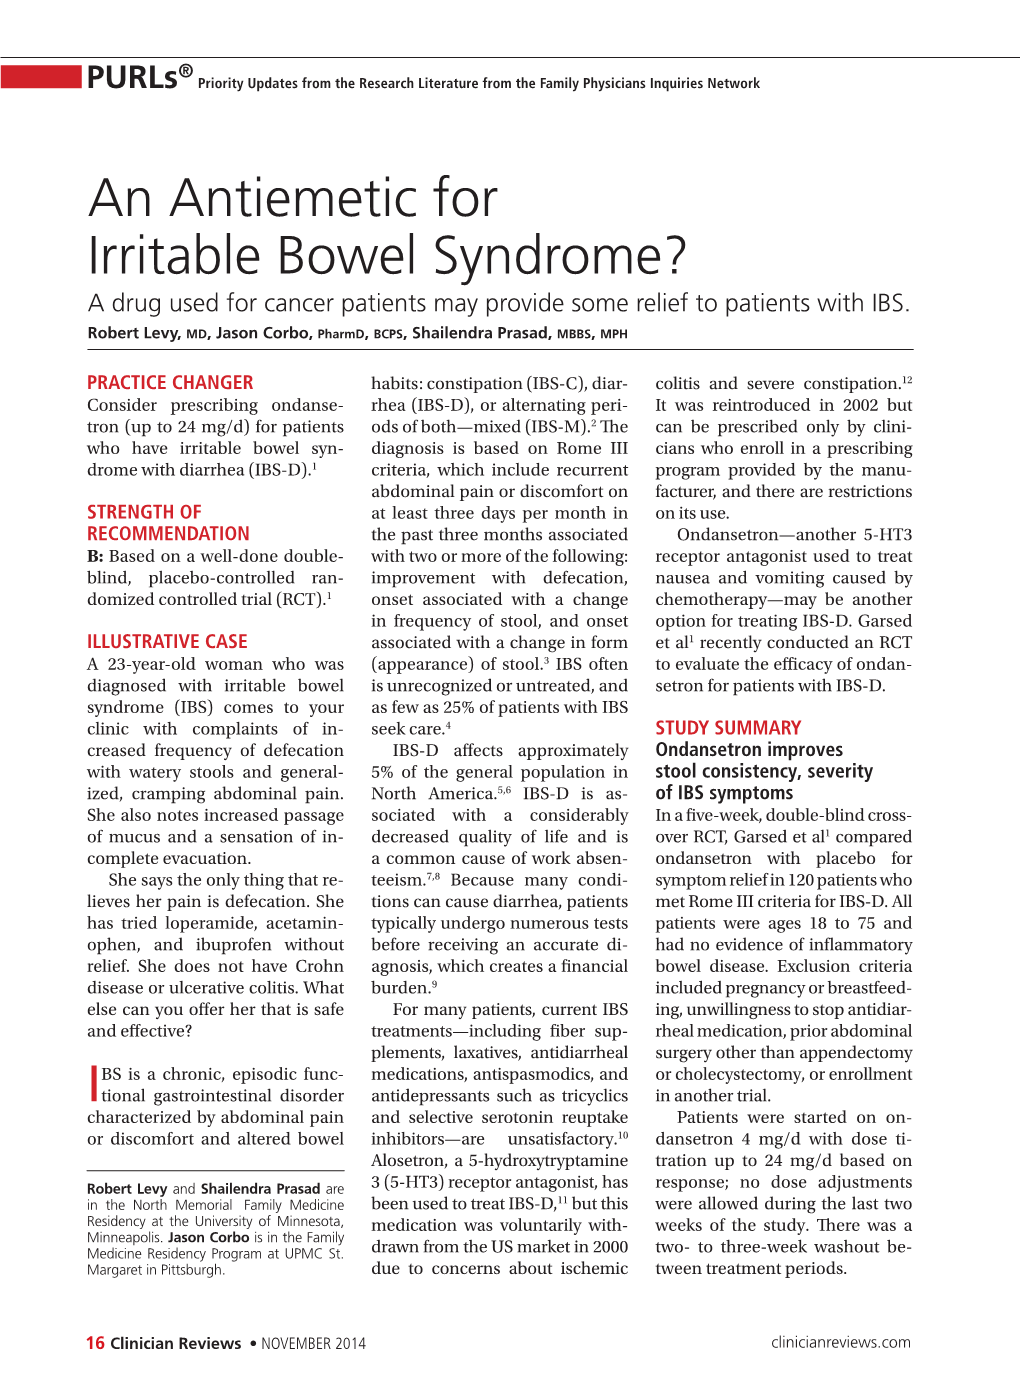 An Antiemetic for Irritable Bowel Syndrome? a Drug Used for Cancer Patients May Provide Some Relief to Patients with IBS